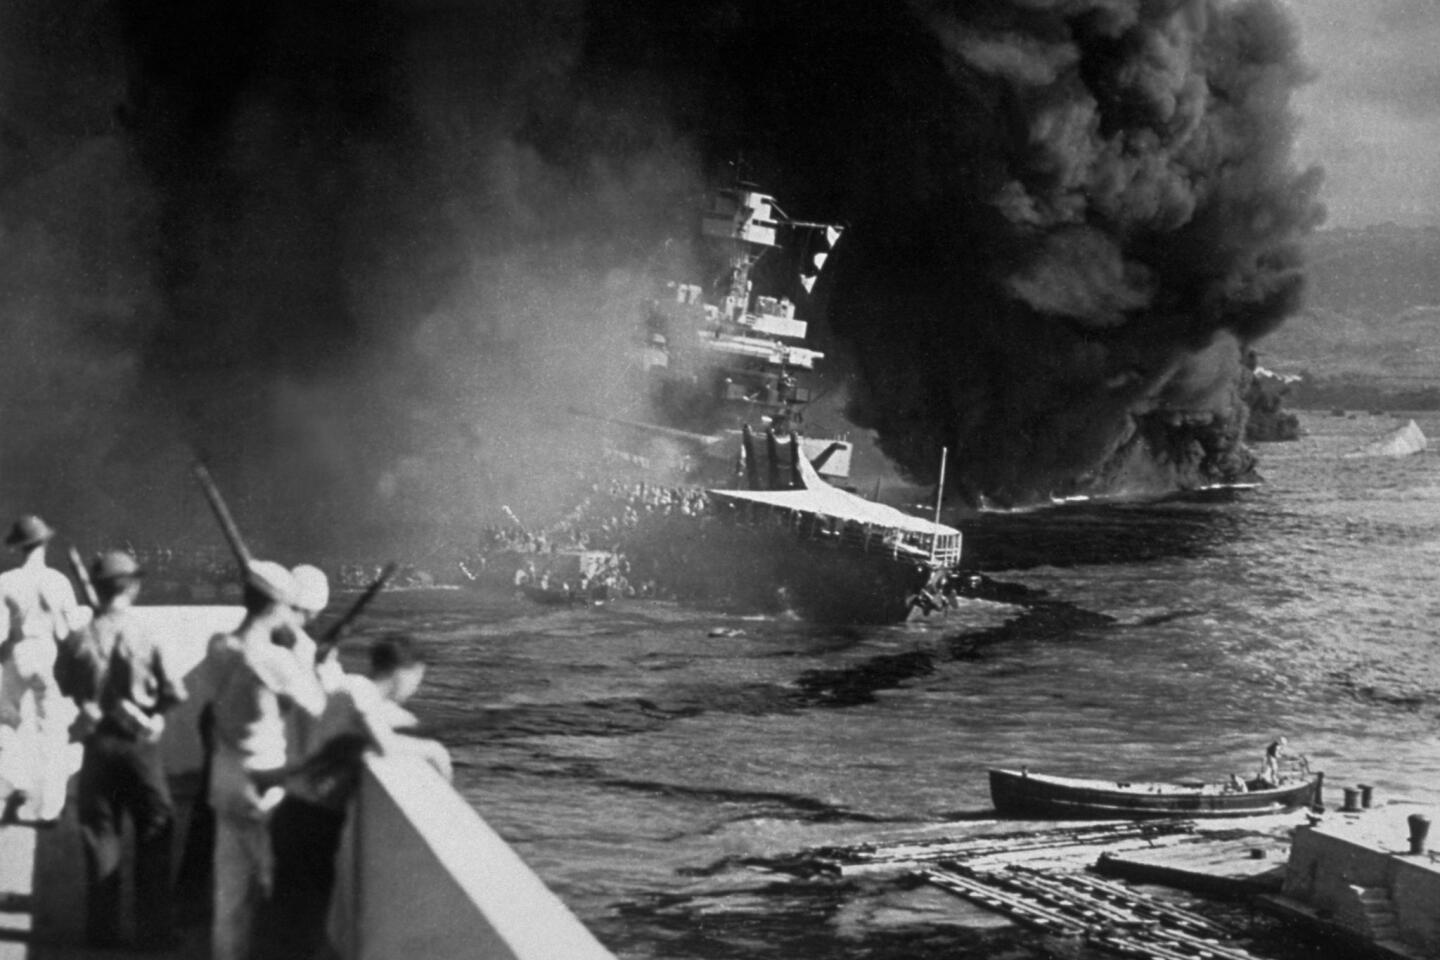 The attack on Pearl Harbor